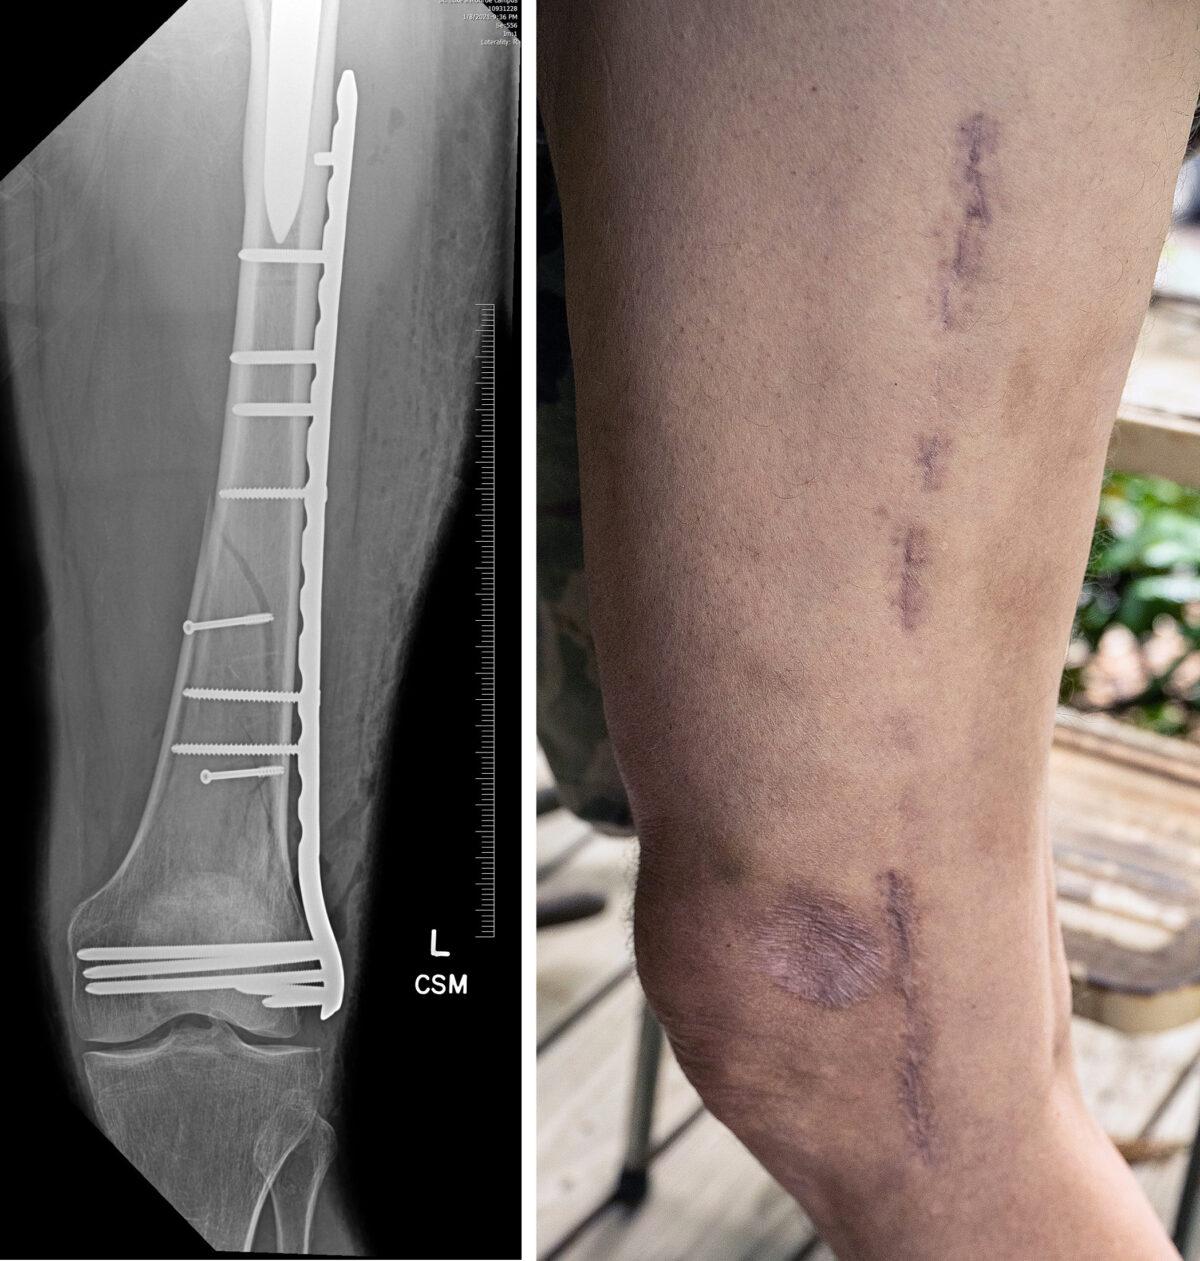 A titanium plate was inserted to splint Mark Griffin's badly fractured leg on Jan. 9, 2021. The plate was finally removed in the spring of 2022. (Left: Mark Griffin; Right: Petr Svab/The Epoch Times)